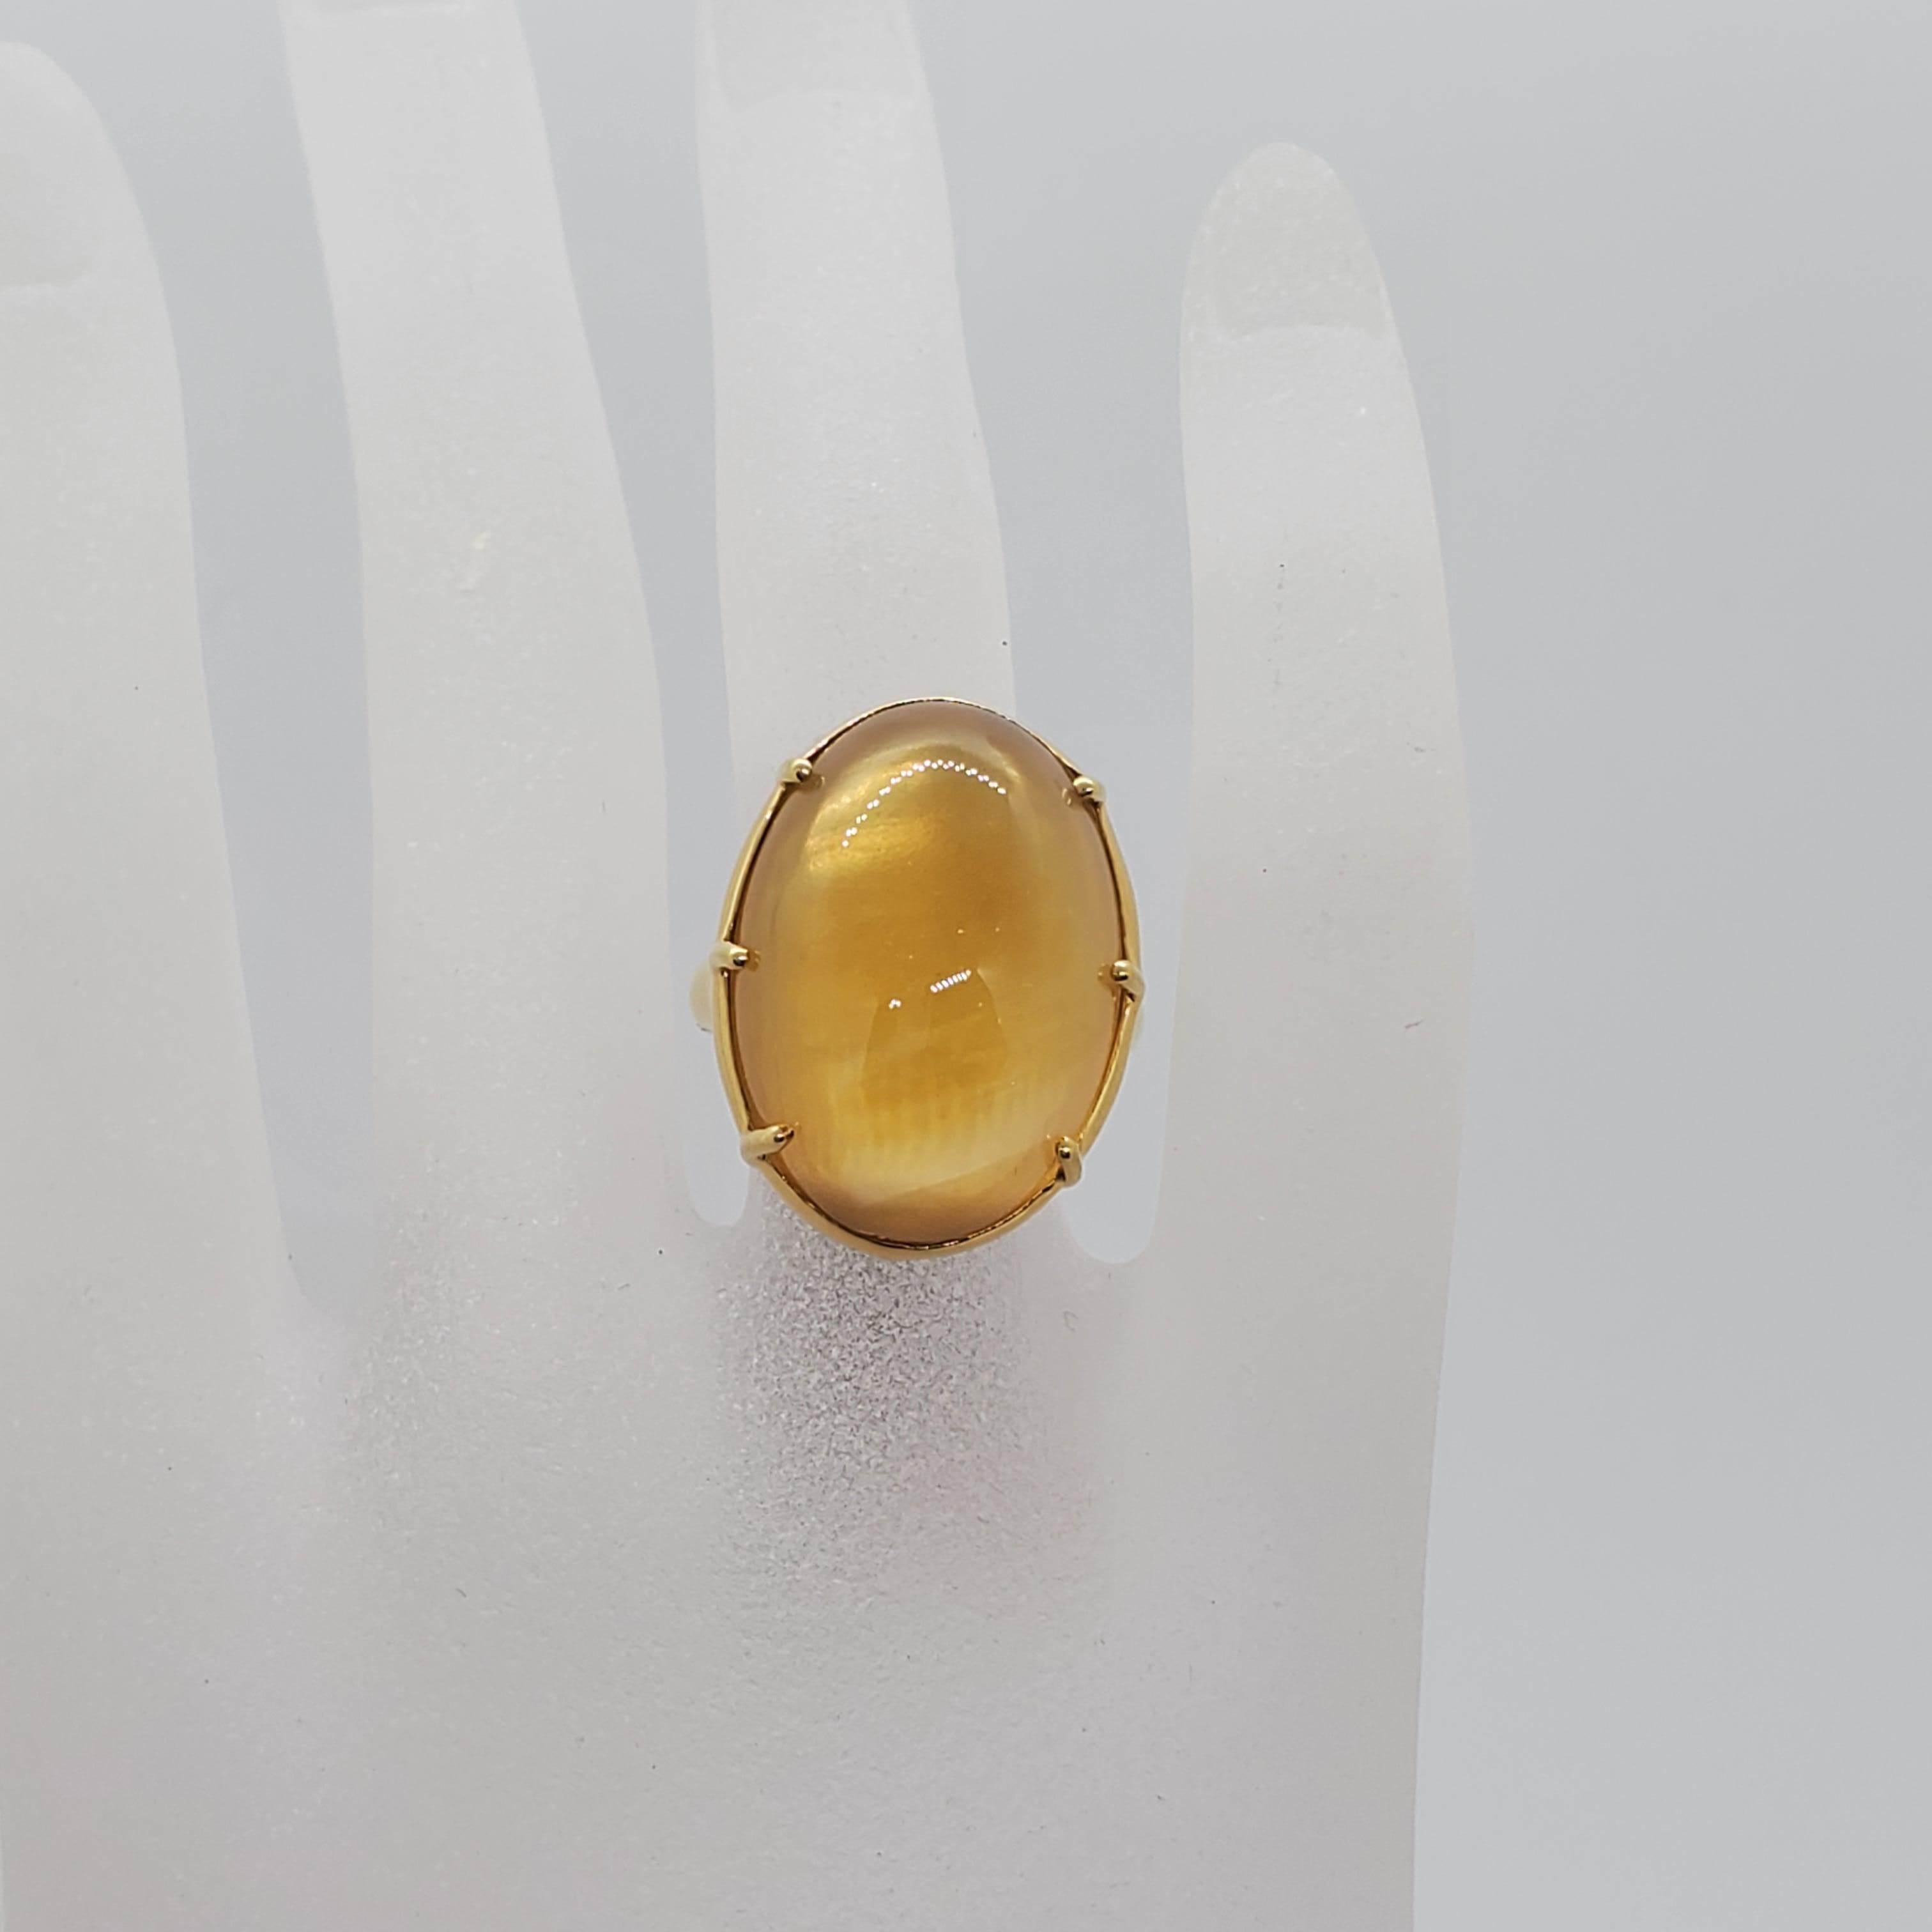 Unique Ippolita estate ring featuring an oval cabochon mother of pearl in a handmade 18k yellow gold mounting. Simple yet powerful, this ring is versatile and easy to wear for any event.